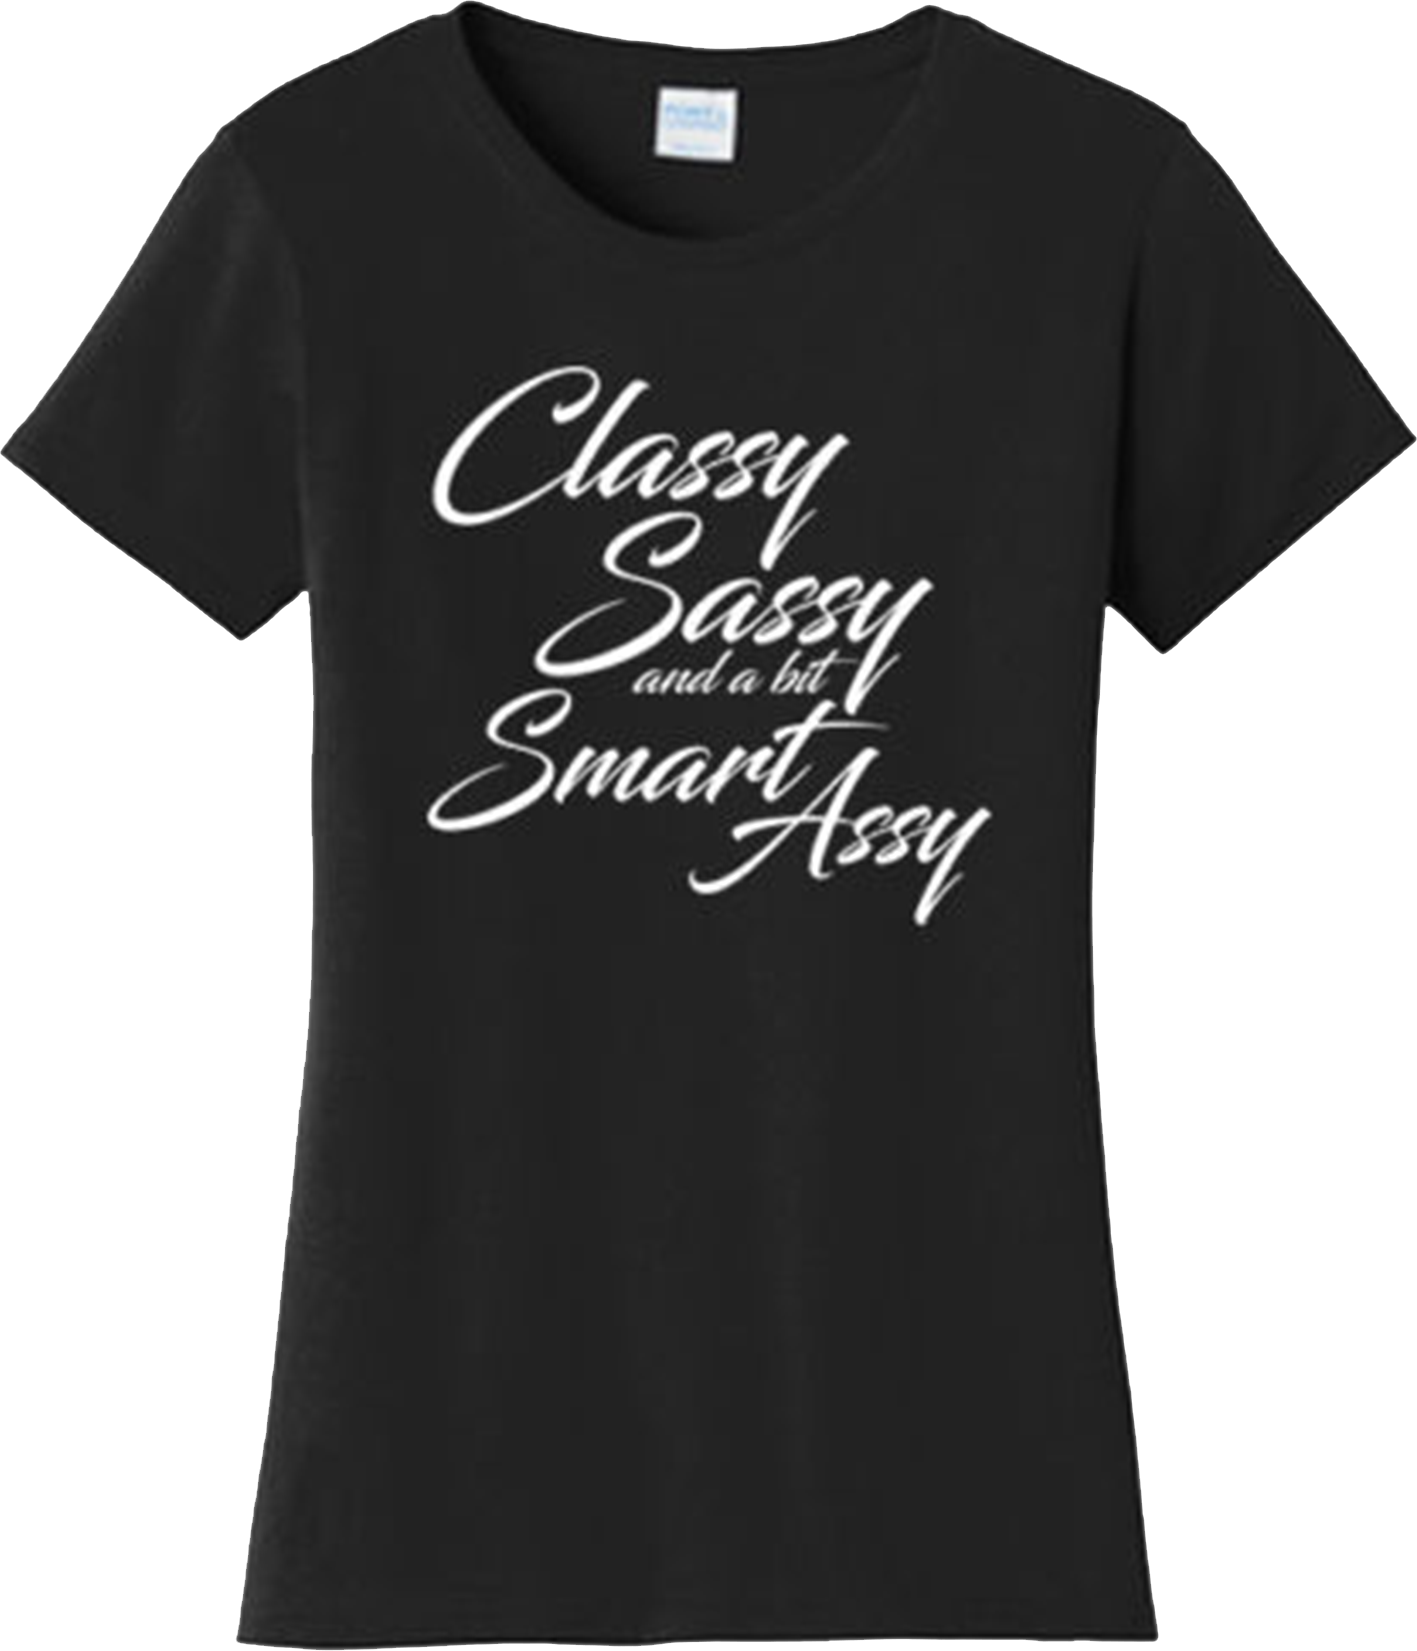 Funny Classy Sassy Smart Assy Humor College Party Gift T Shirt New Graphic Tee